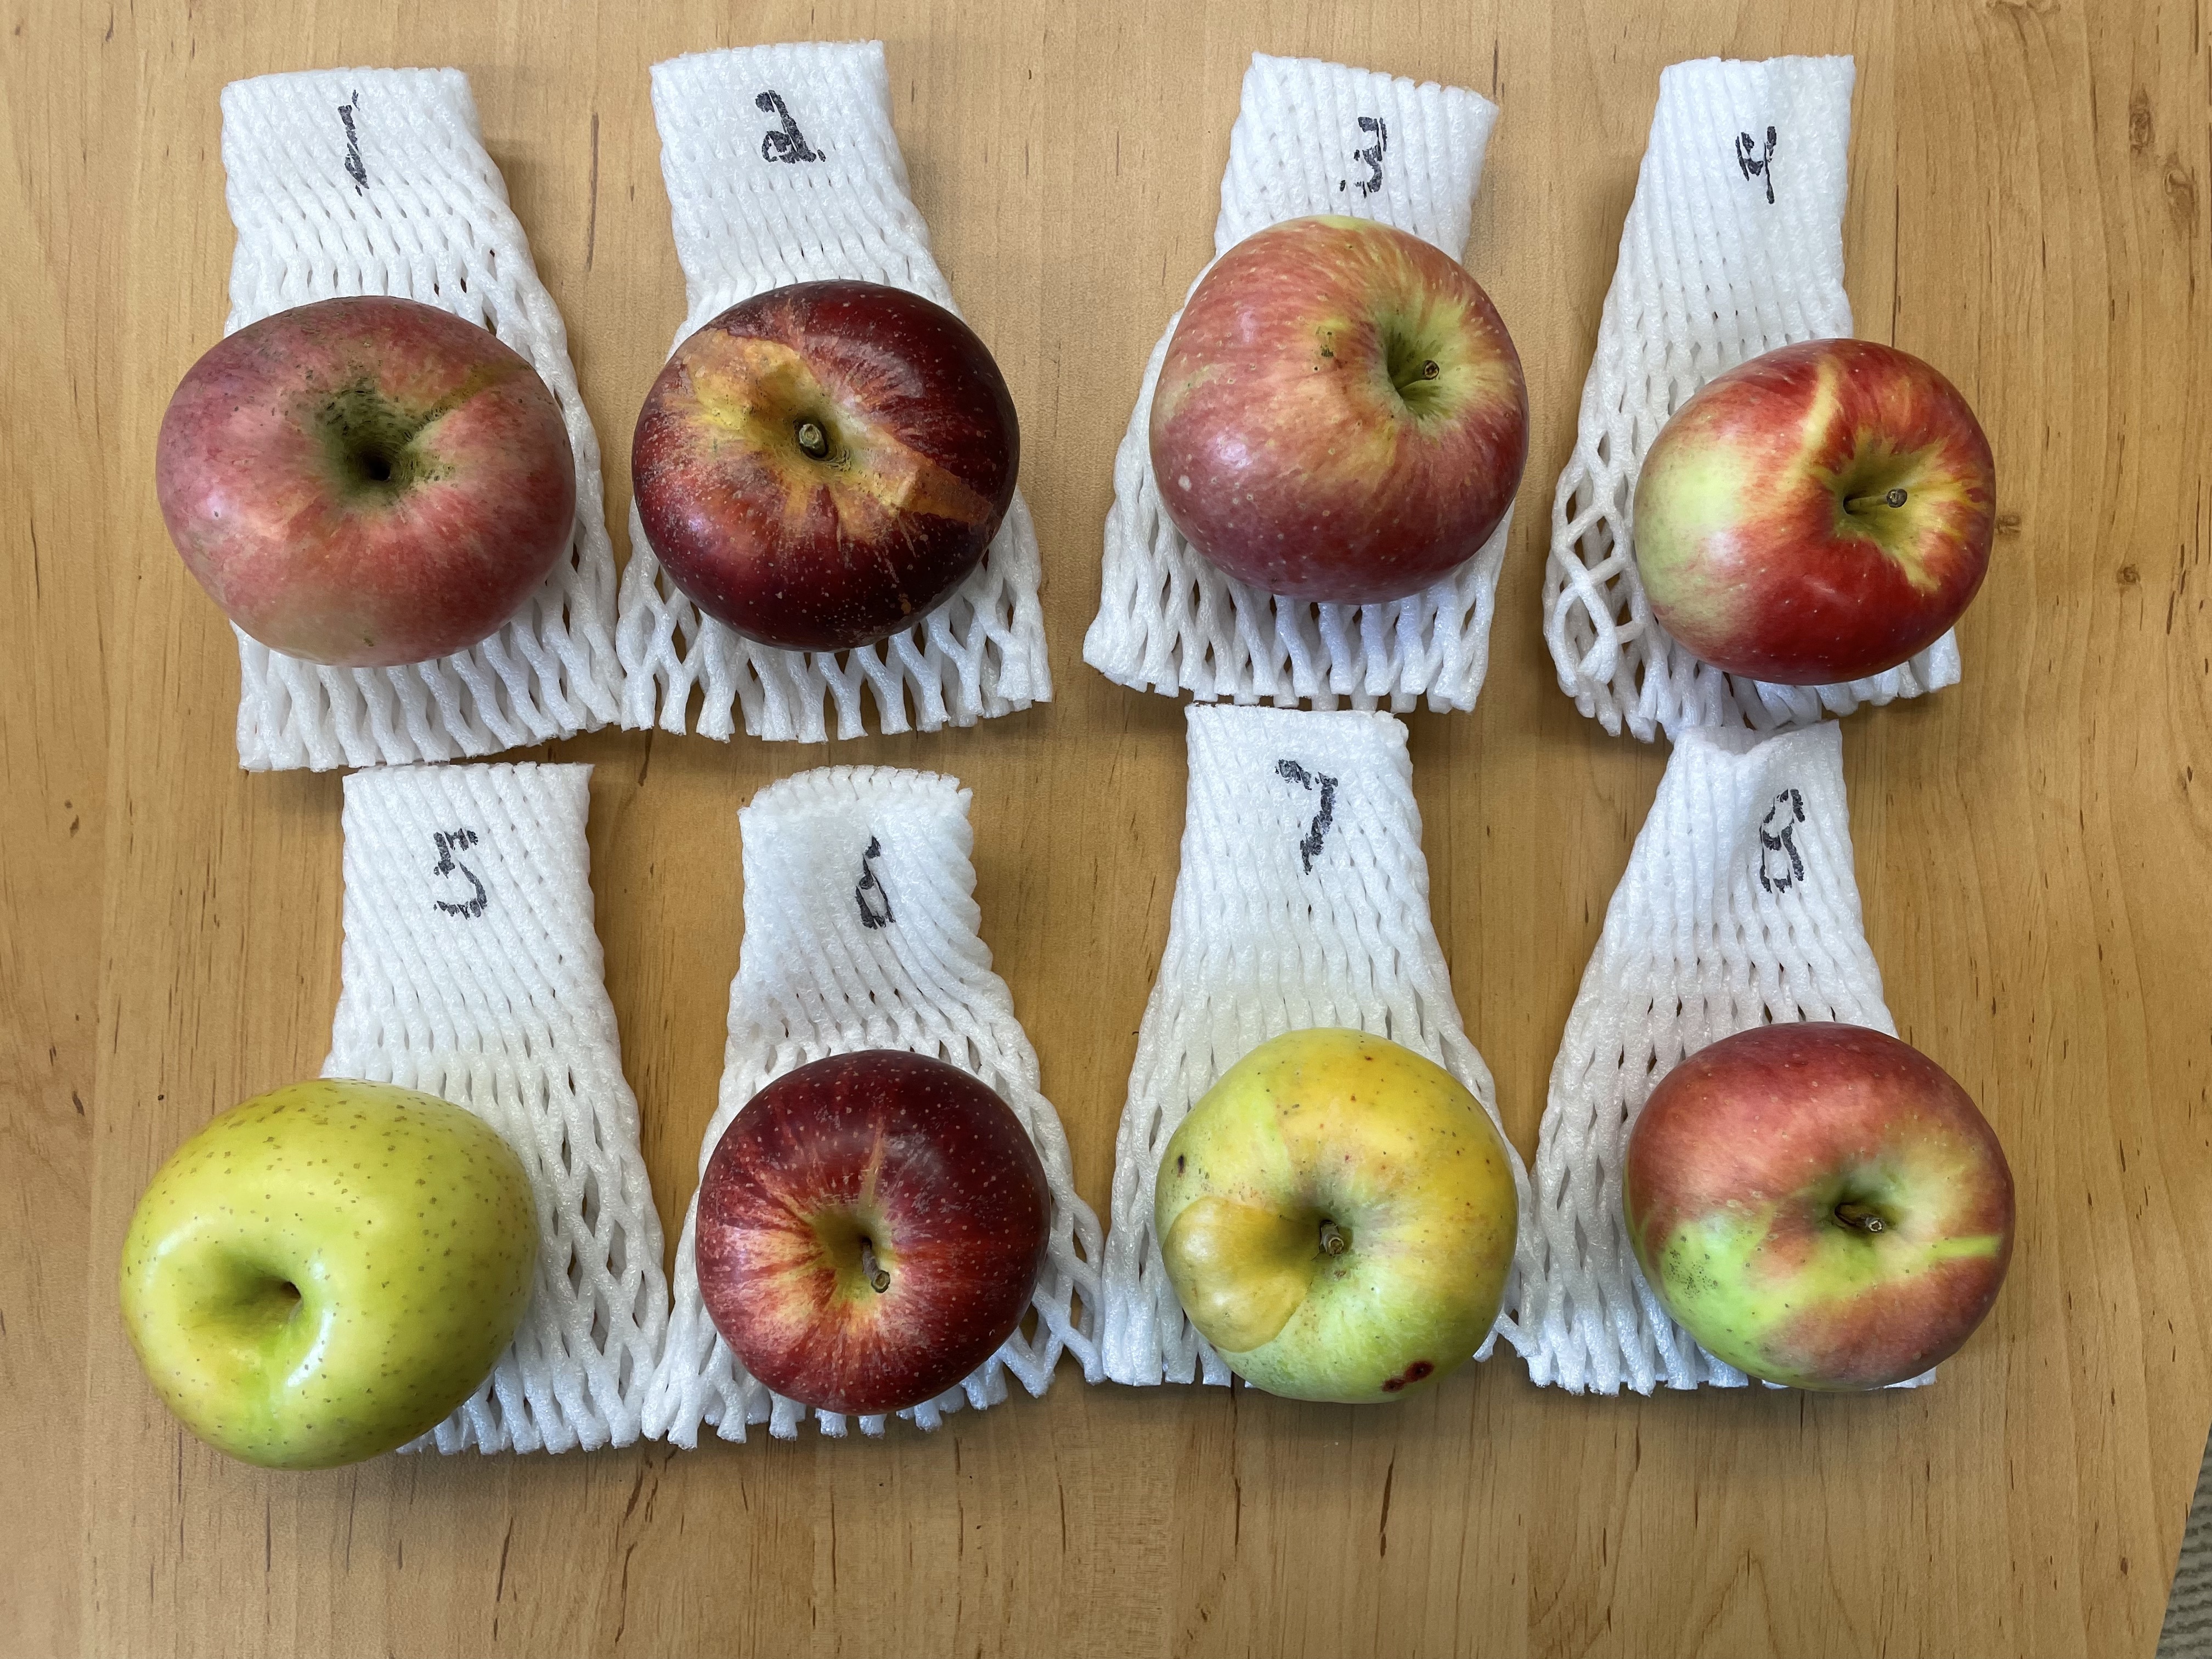 A selection of apples to taste from Diane Miller.  We loved the MAIA advanced selections, especially #3 (Summersweet) and #7 (Juicycrisp)